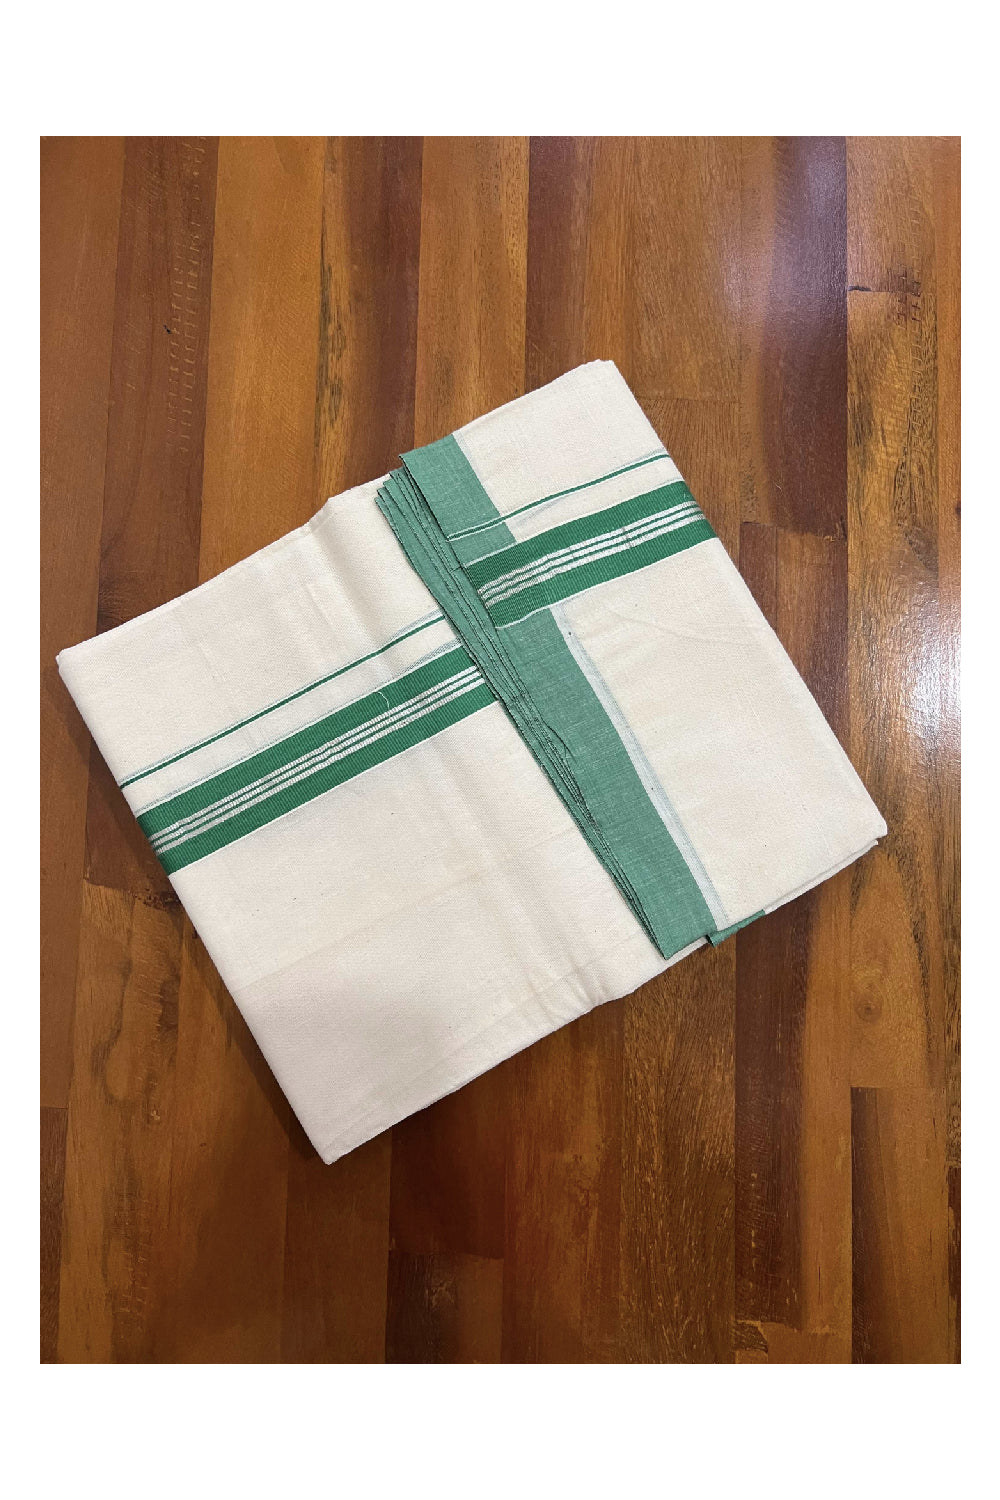 Off White Cotton Mundu with Green and Silver Kasavu Border (South Indian Dhoti)